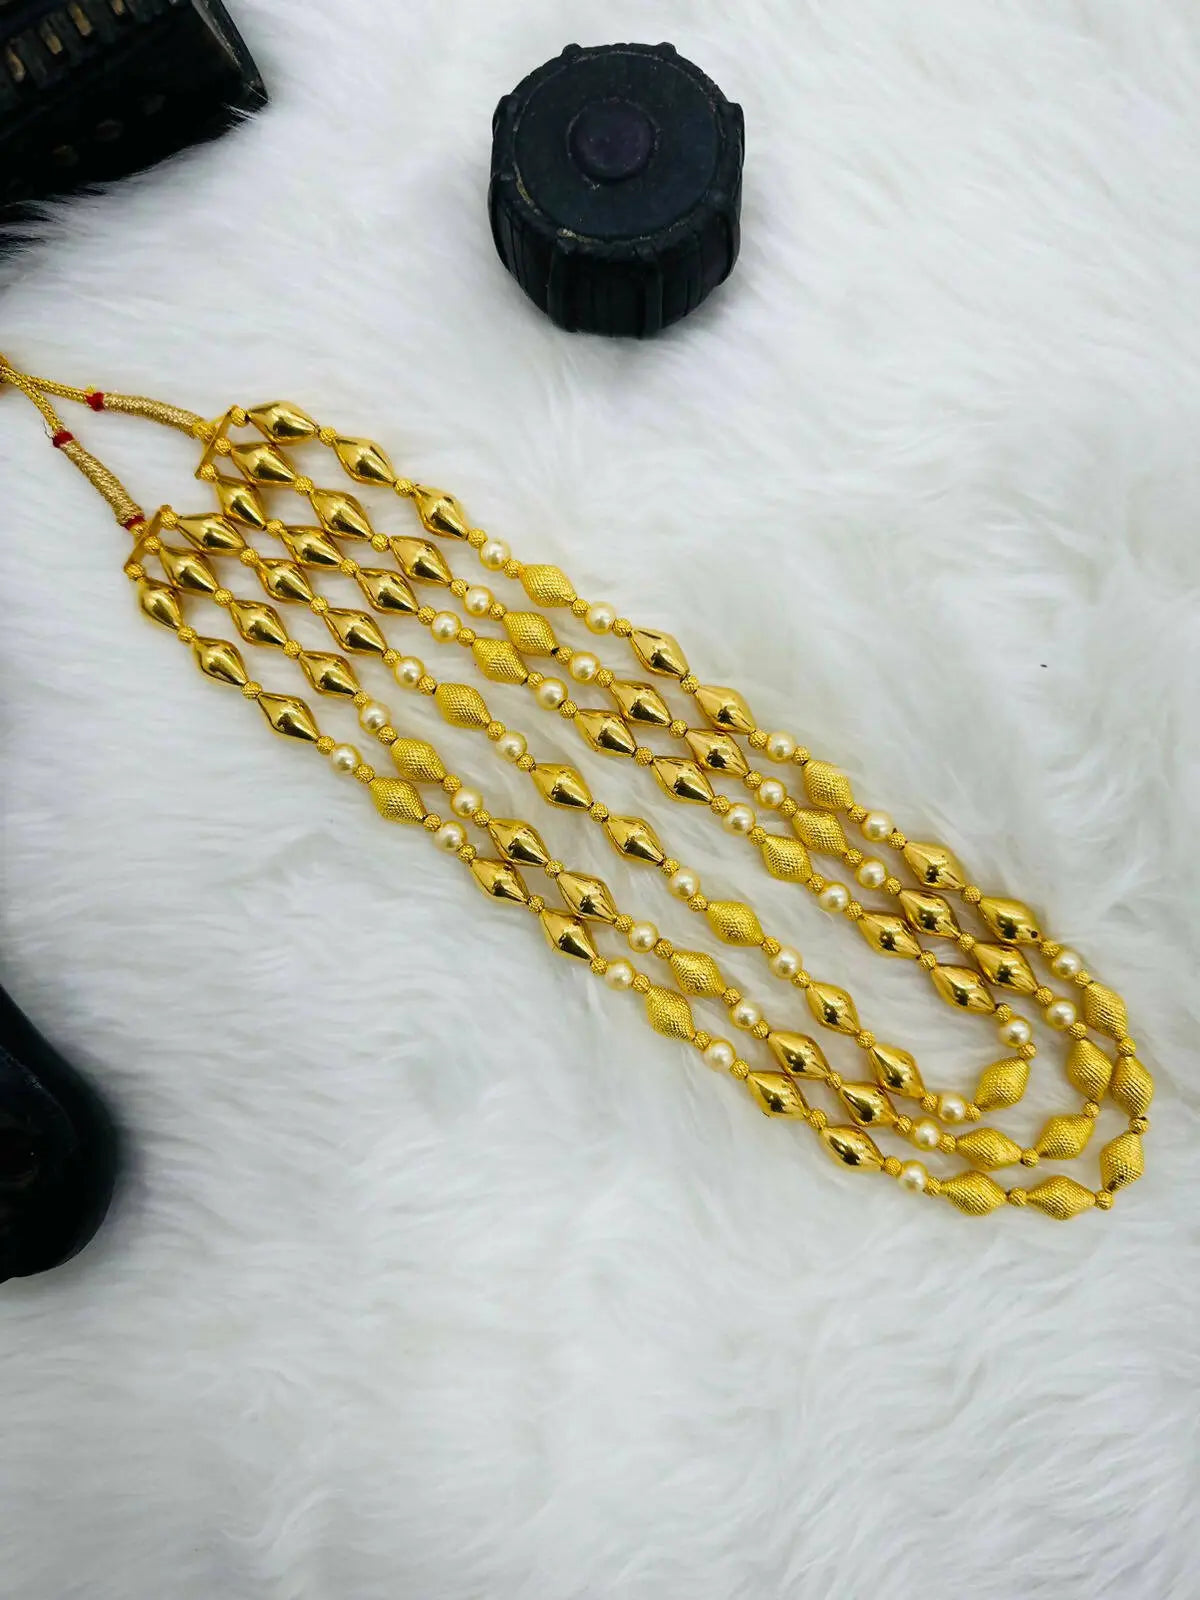 3 Hoops Necklace Gold Chain Link 26 Inch,45 Grams 22K 23K 24K Thai Baht  Yellow Gold Plated for Men,women Jewelry Amulet Necklace Thailand - Etsy  Israel